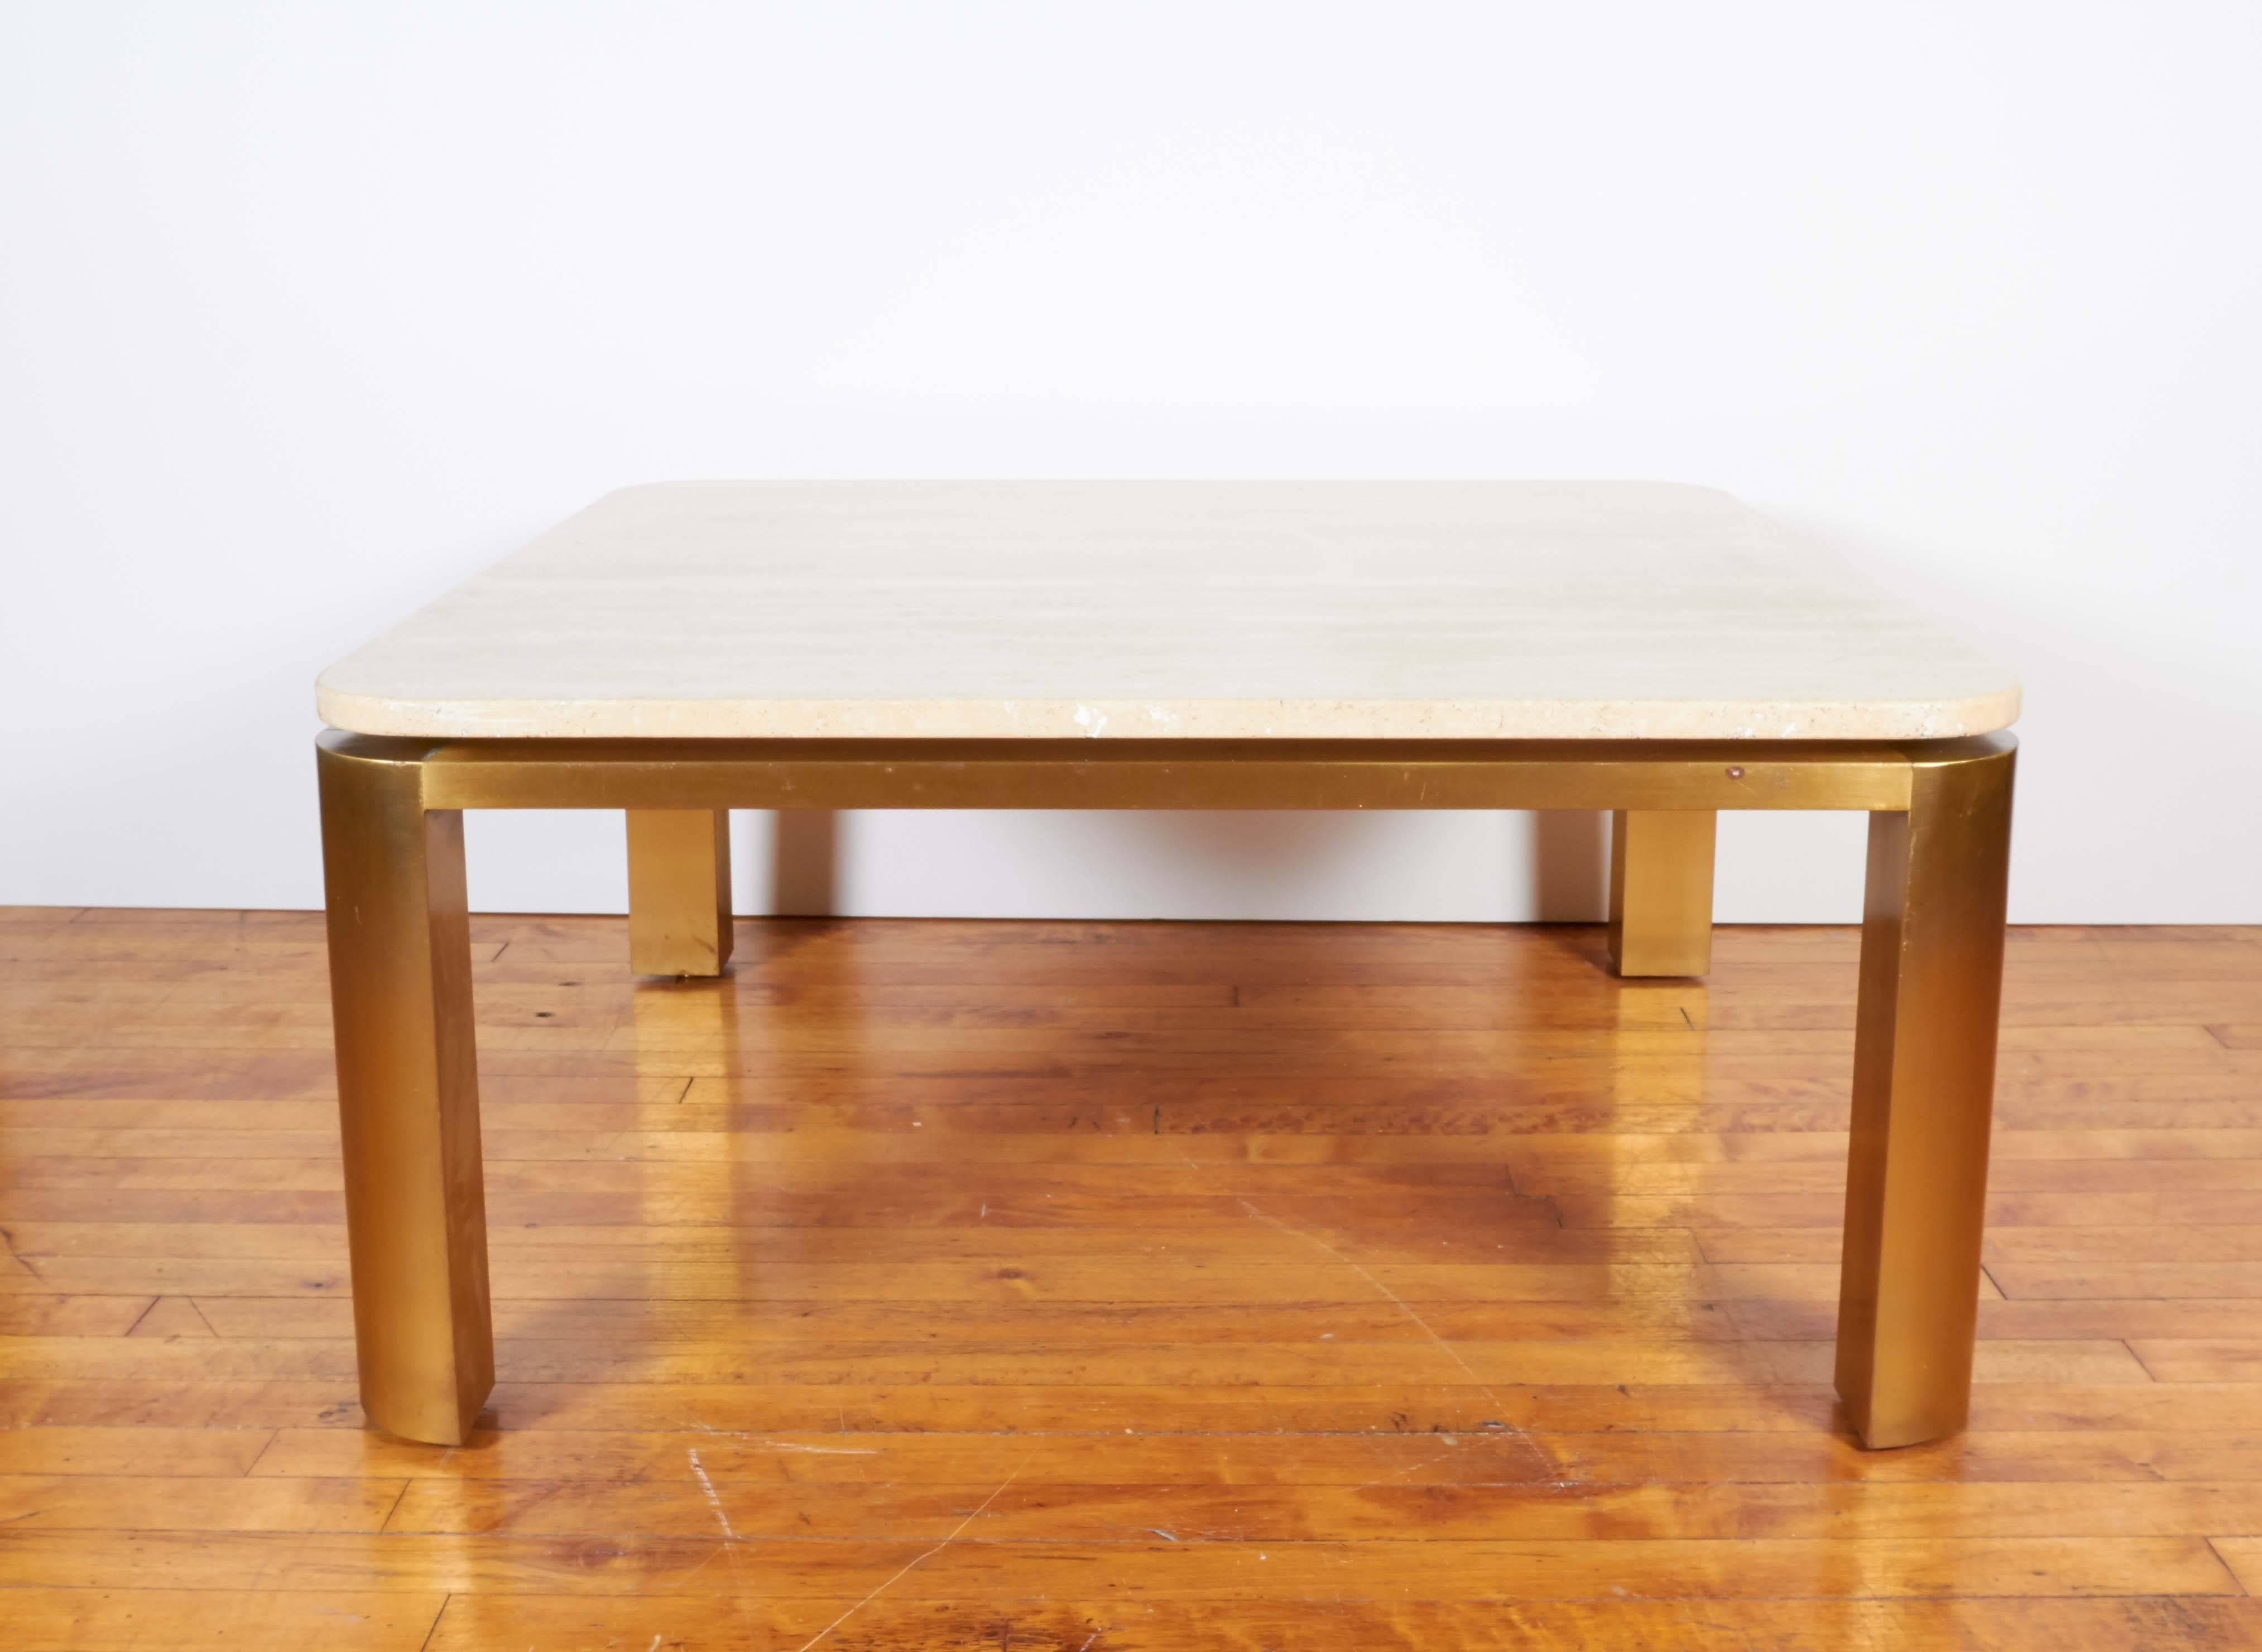 Brushed Leon Rosen Floating Travertine Top Coffee Table in Brass for Pace